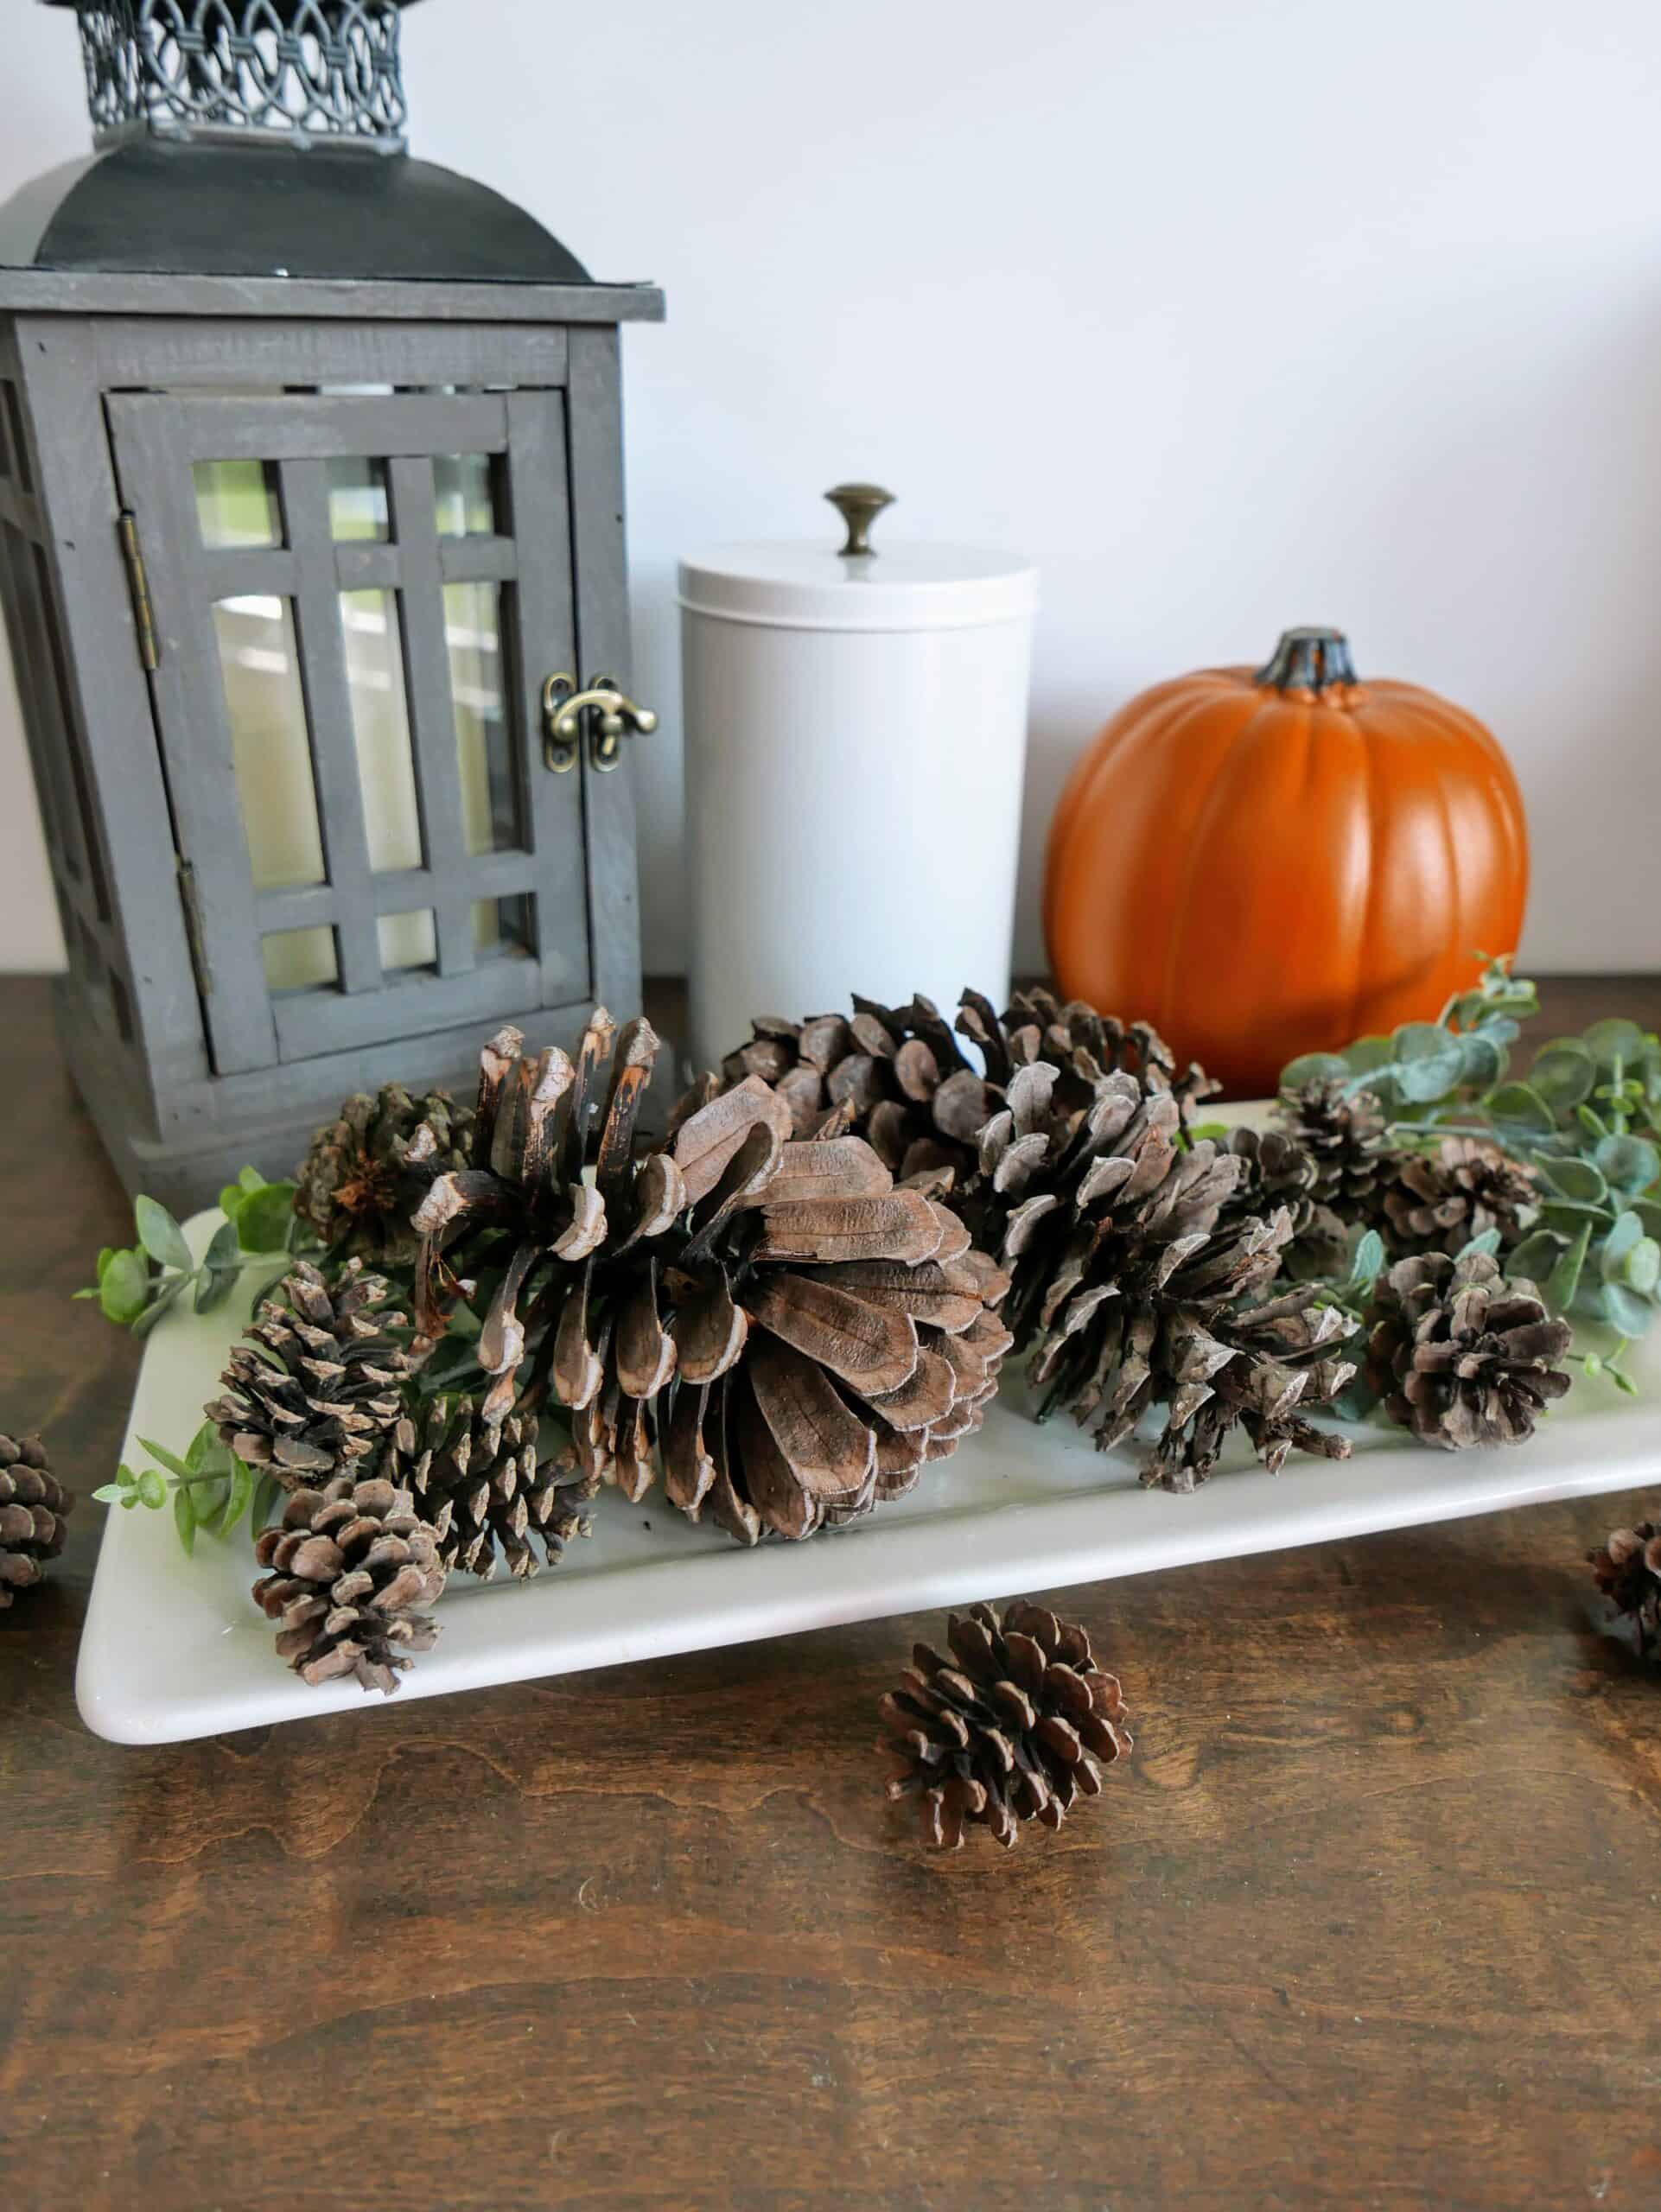 Make Your Own Cinnamon Scented Pine Cones